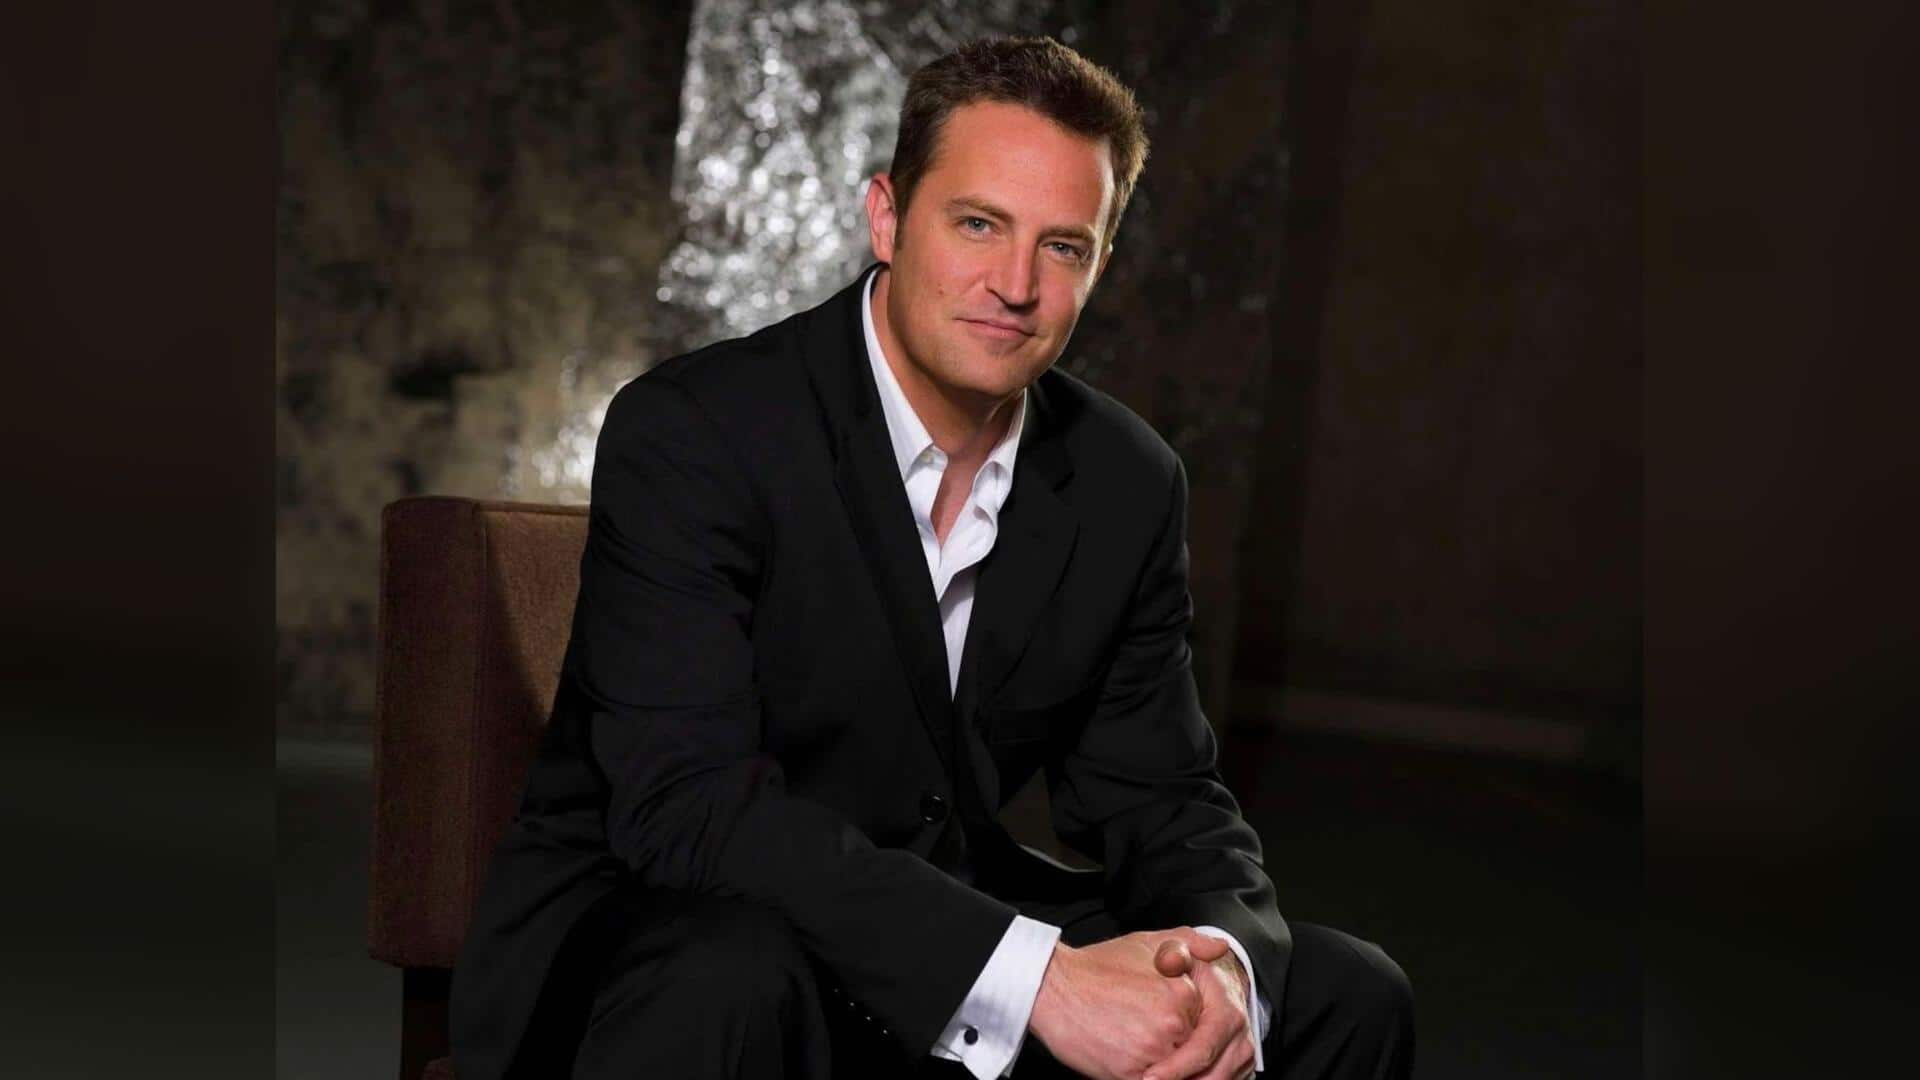 Matthew Perry tribute special to feature unseen interviews, behind-the-scenes footage